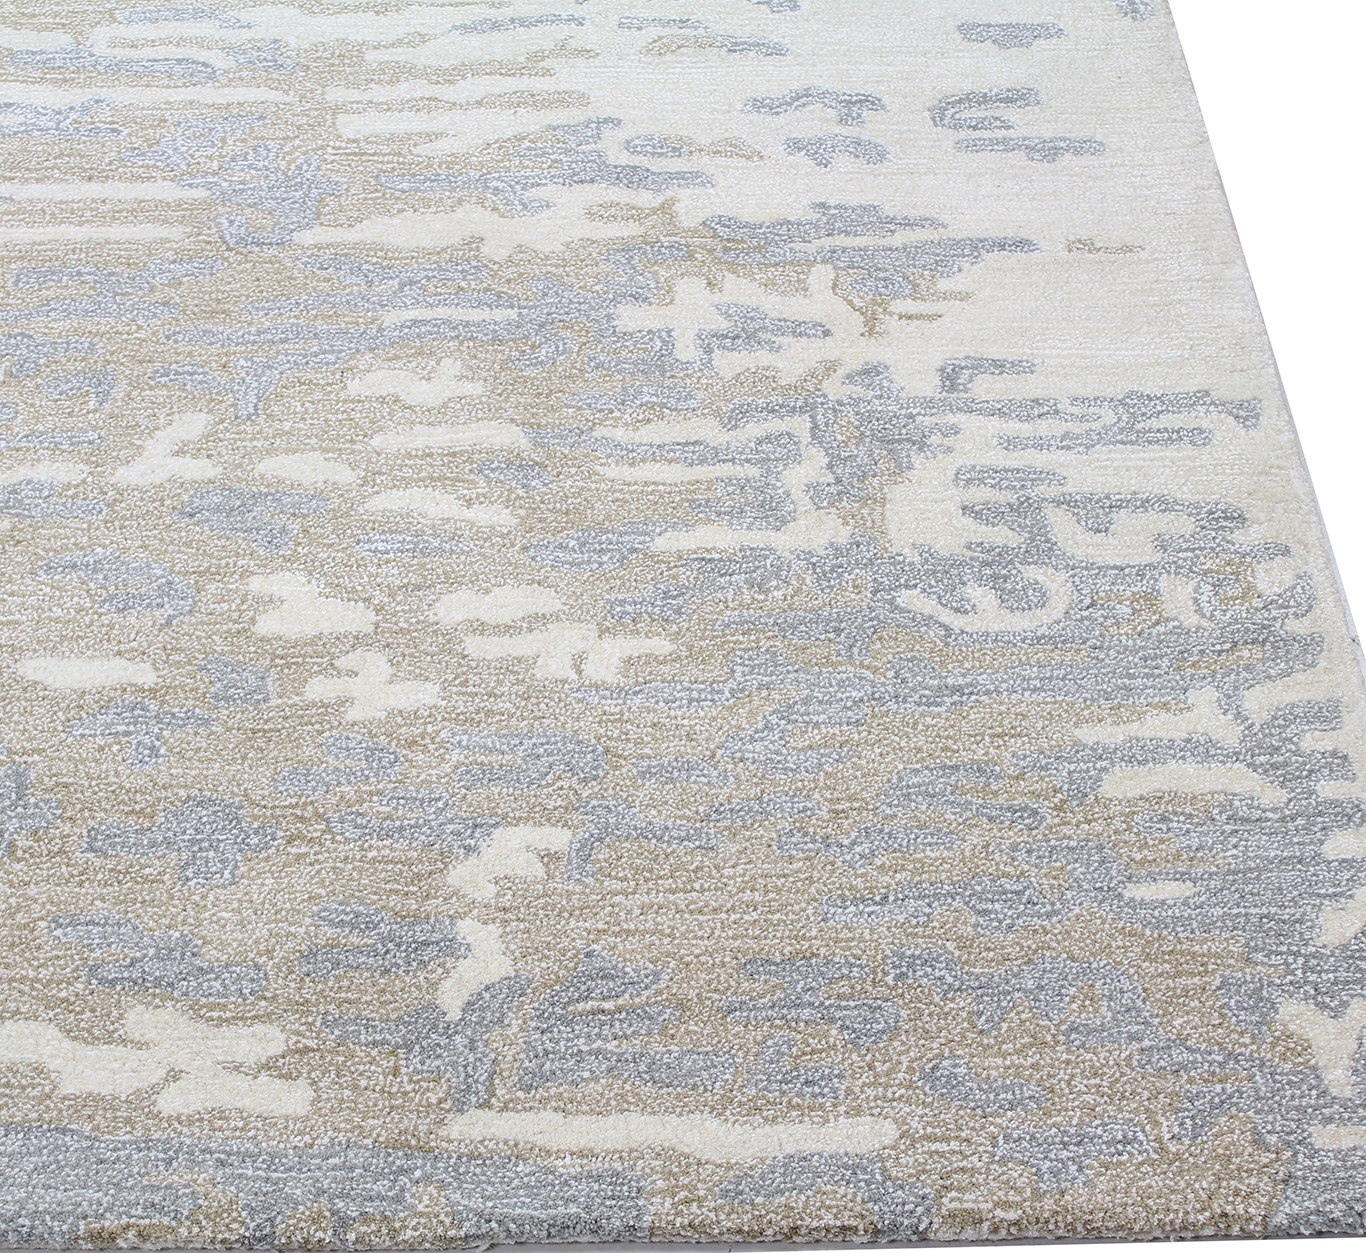 SILKEN 5X7.6 WOOL AND VISCOSE Area Rug - IVORY - Image 1